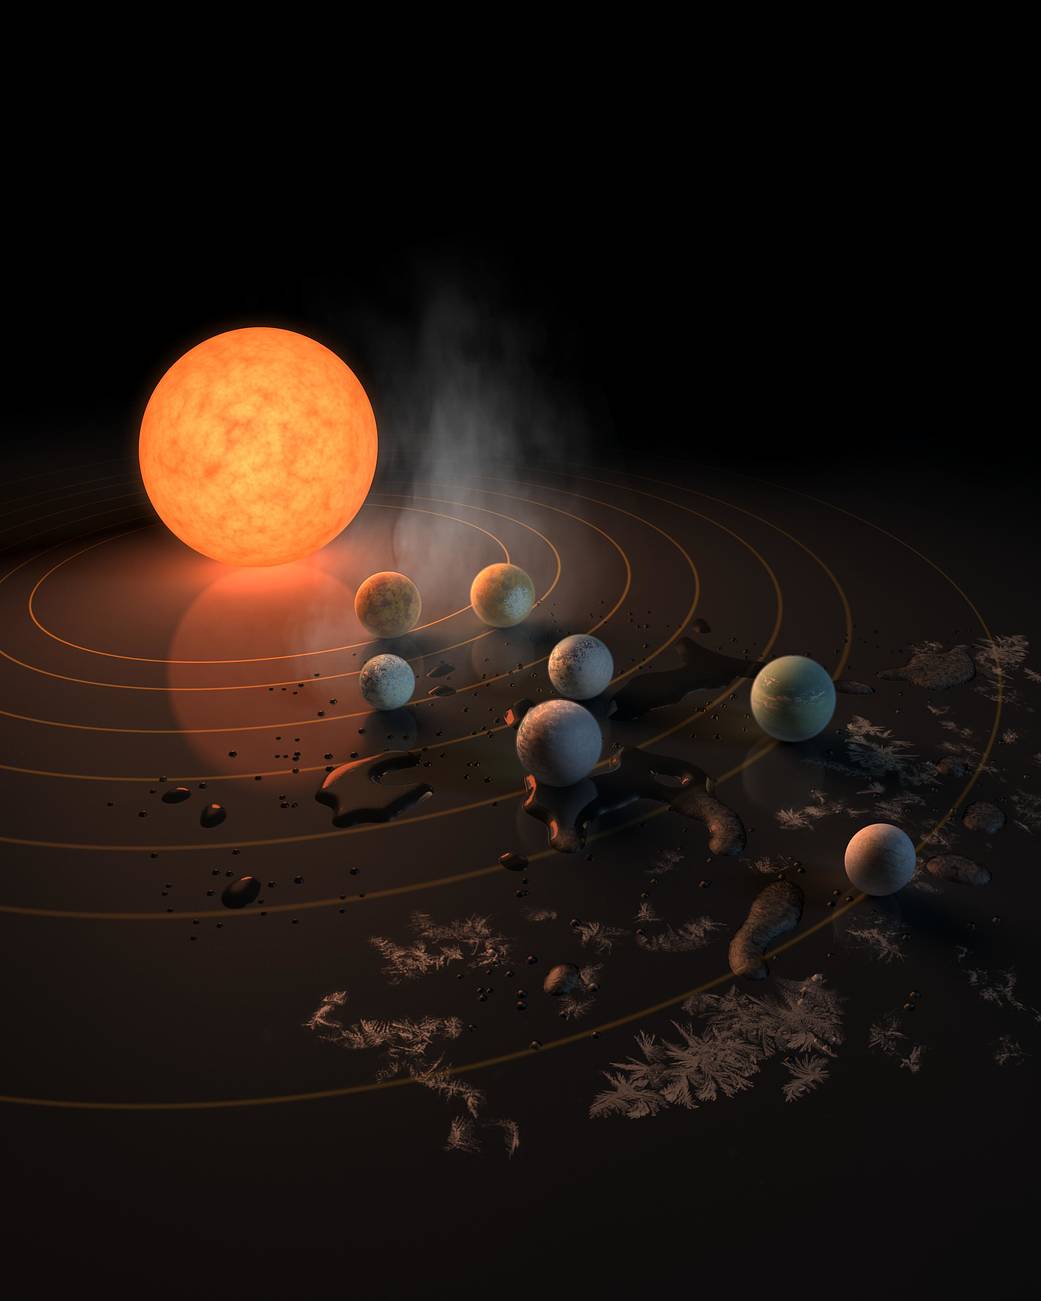 The TRAPPIST-1 star, an ultra-cool dwarf, has seven Earth-size planets orbiting it